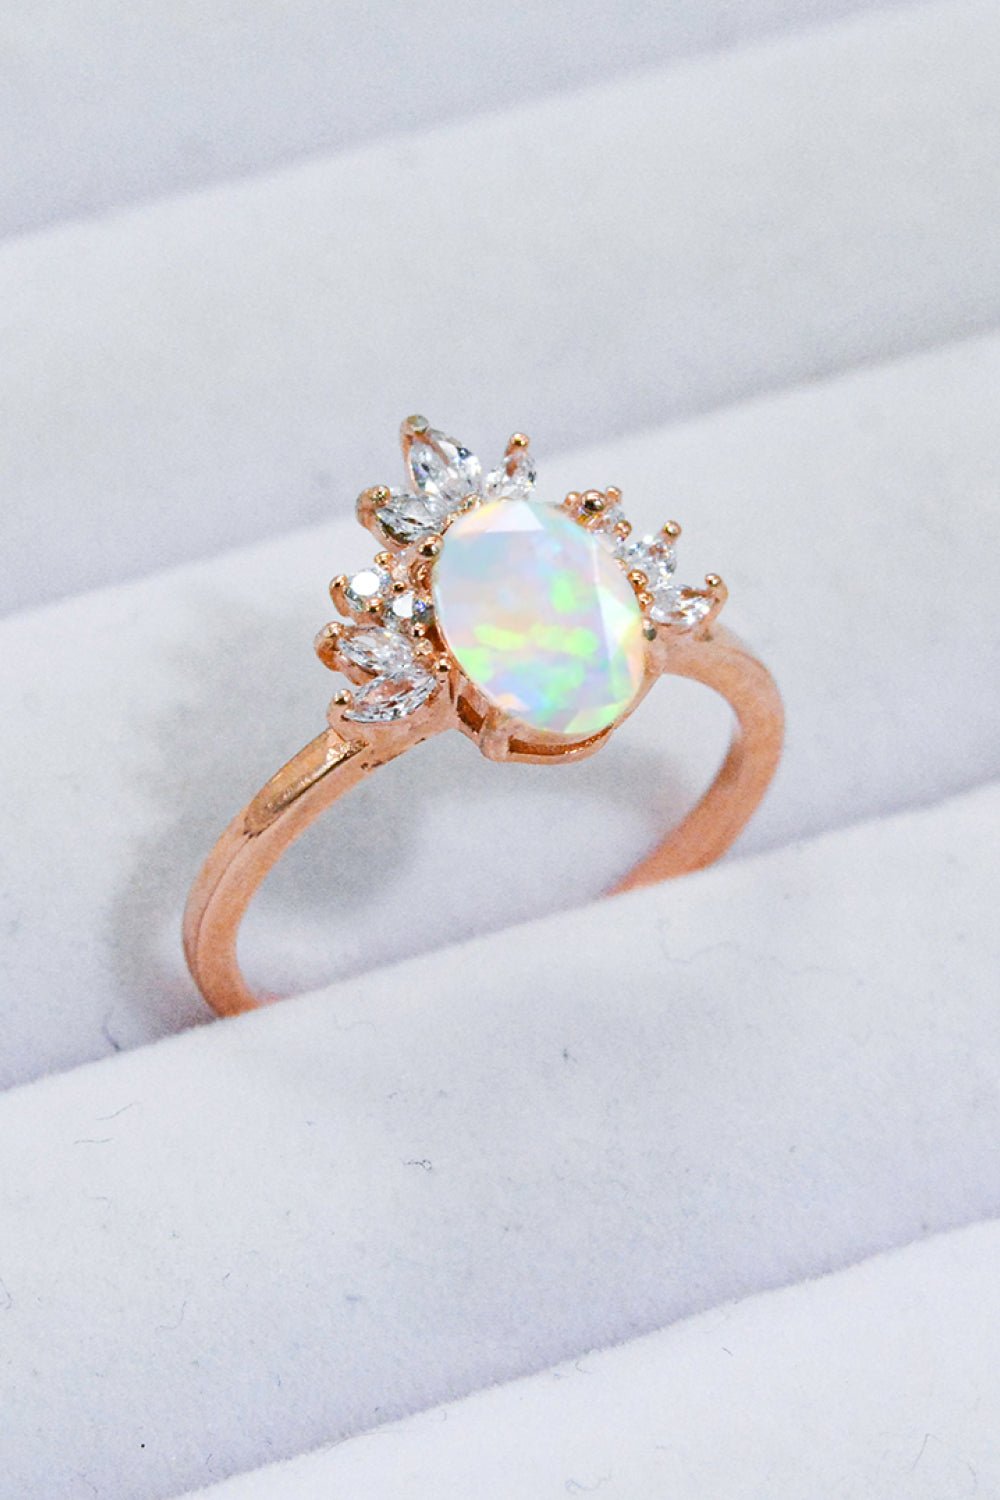 Best Of Me 925 Sterling Silver Opal Ring - PINKCOLADA--100100338817915